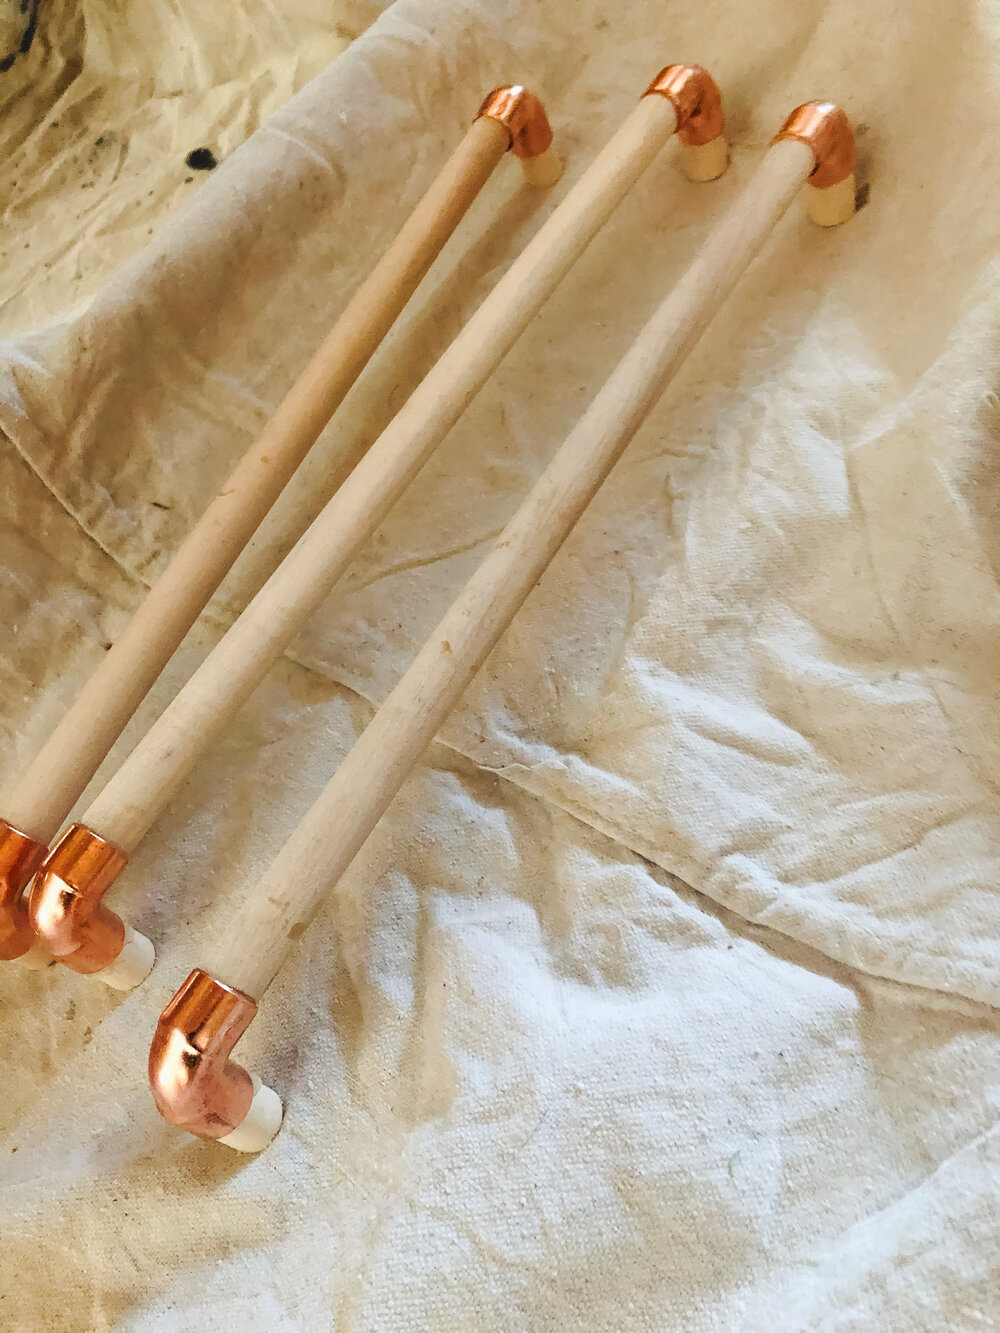 Cut dowels to size and install in copper elbows with epoxy.